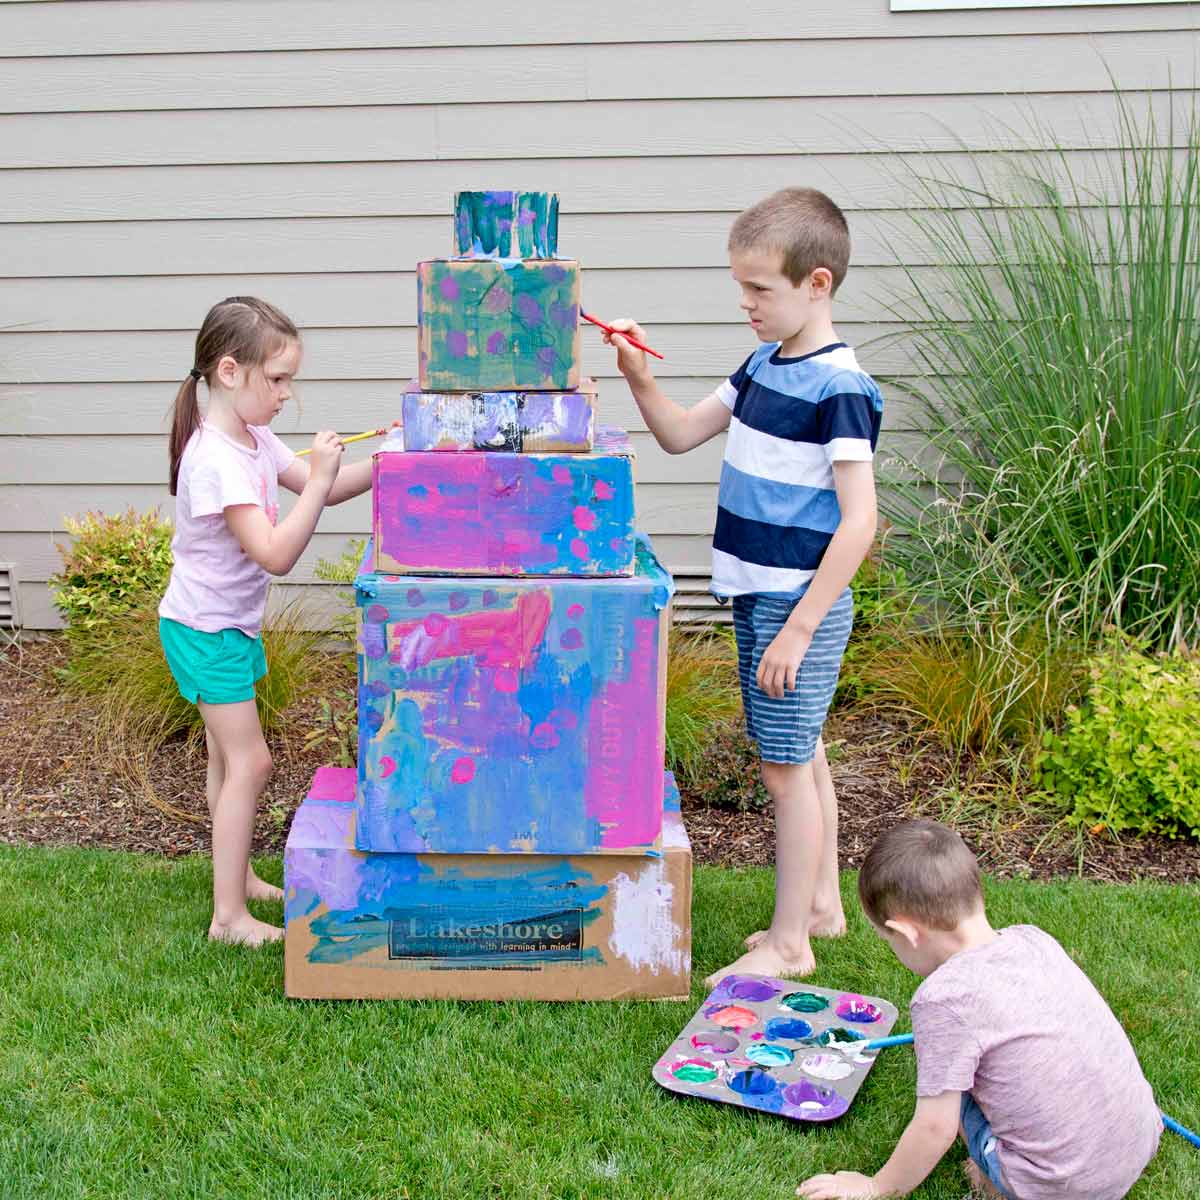 Three kids are painting a box cake outside. The cake has six tiers. They are using paint from a muffin tin which is sitting on grass.